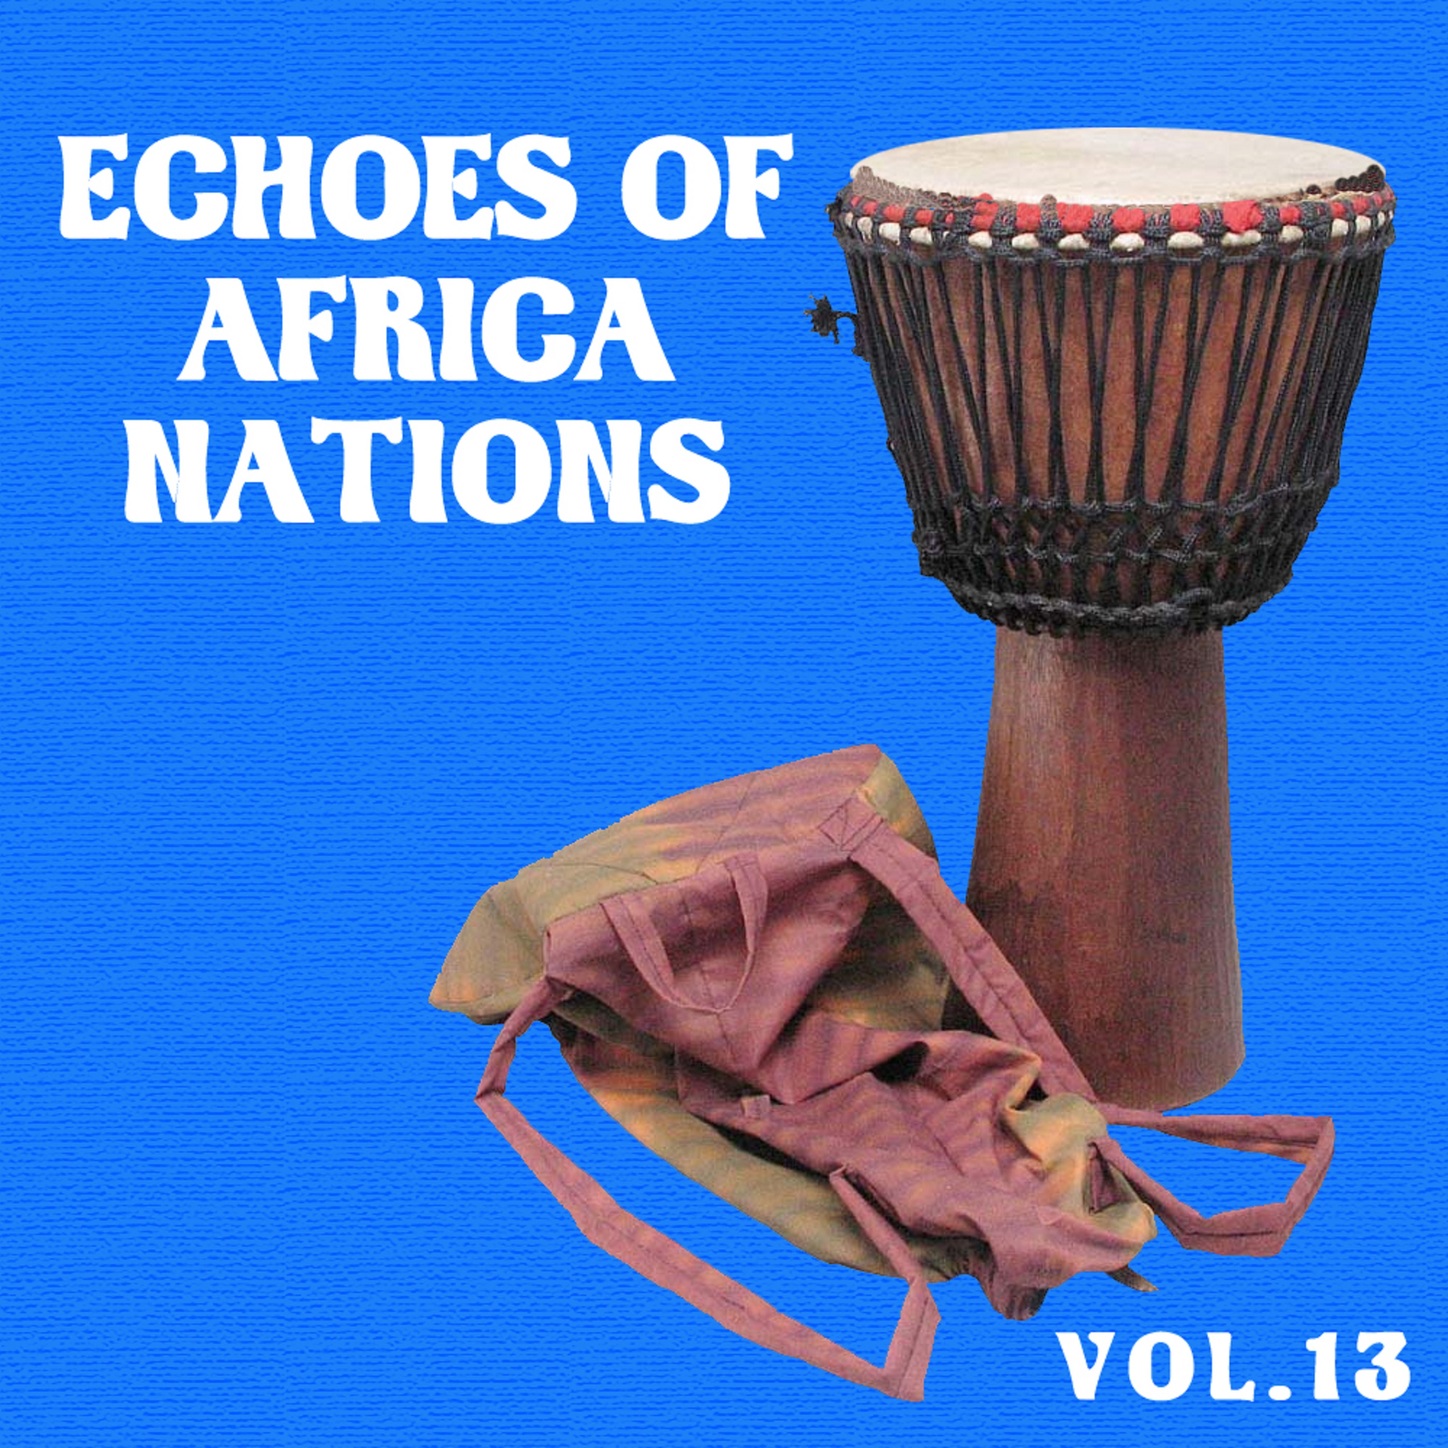 Echoes of African Nations Vol, 13